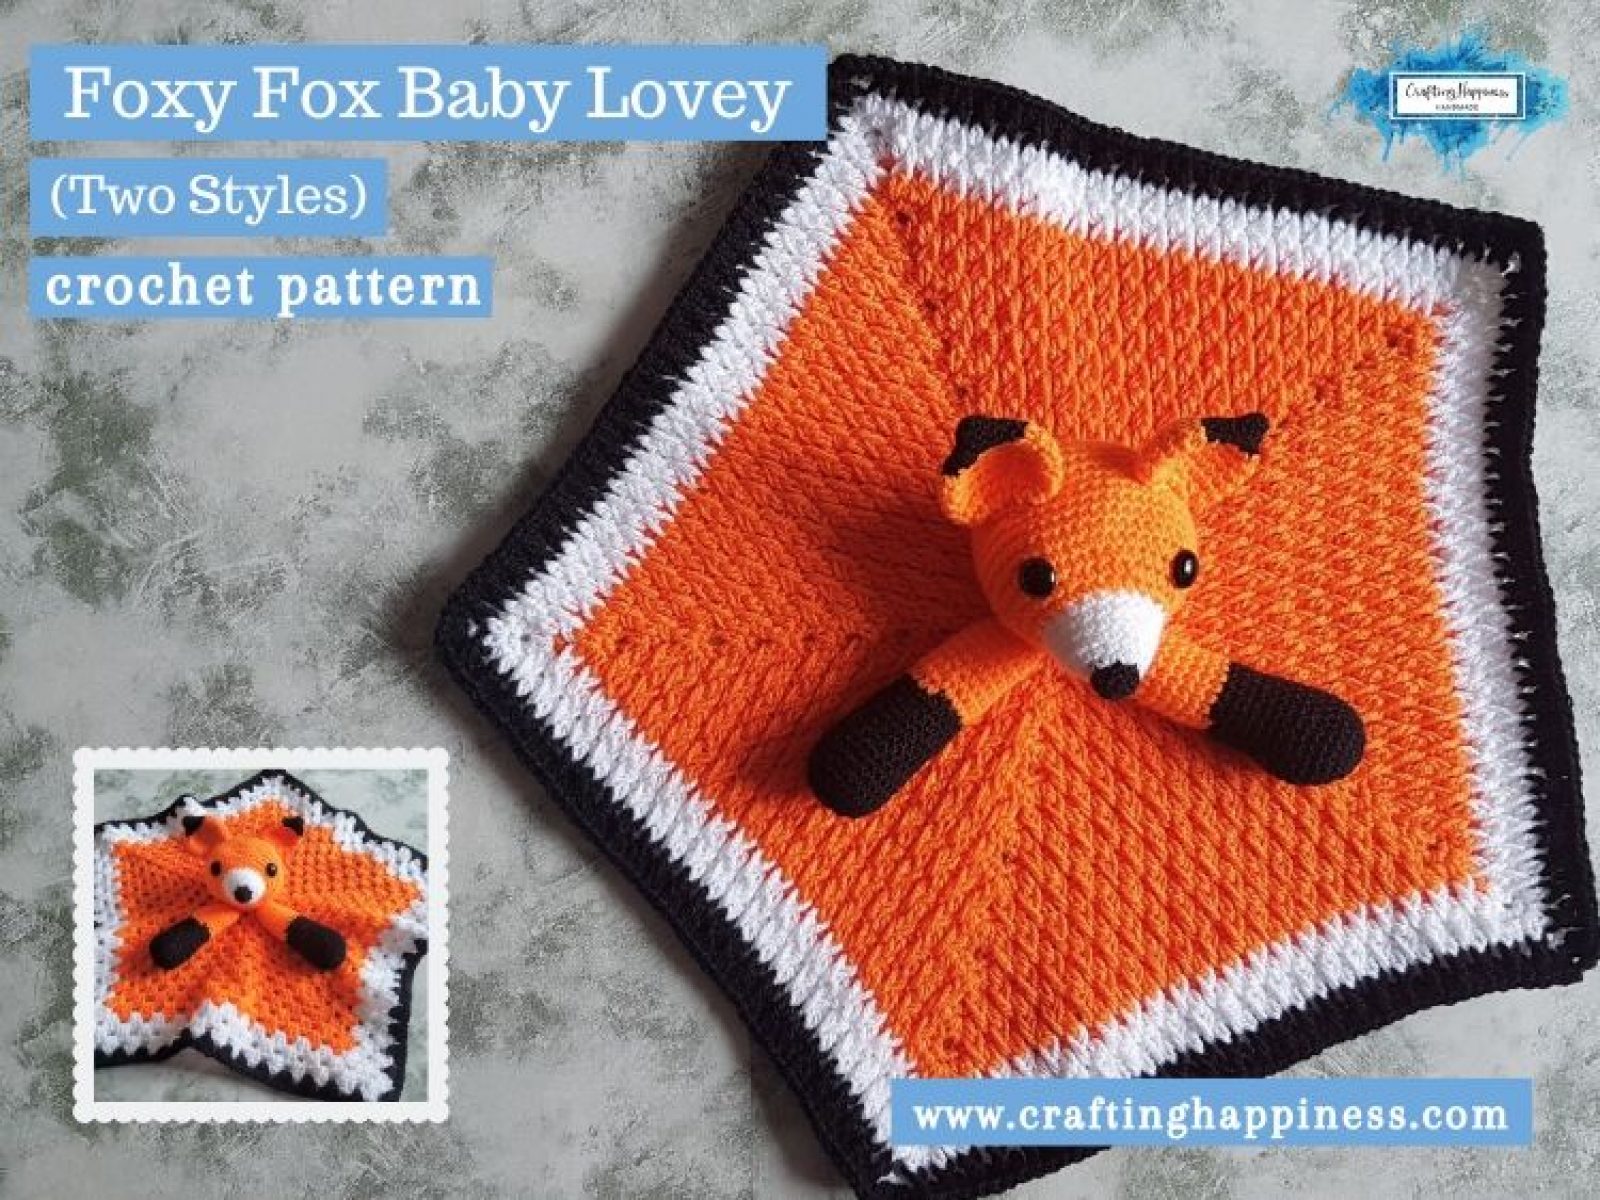 Foxy Fox Baby Lovey by Crafting Happiness FACEBOOK POSTER